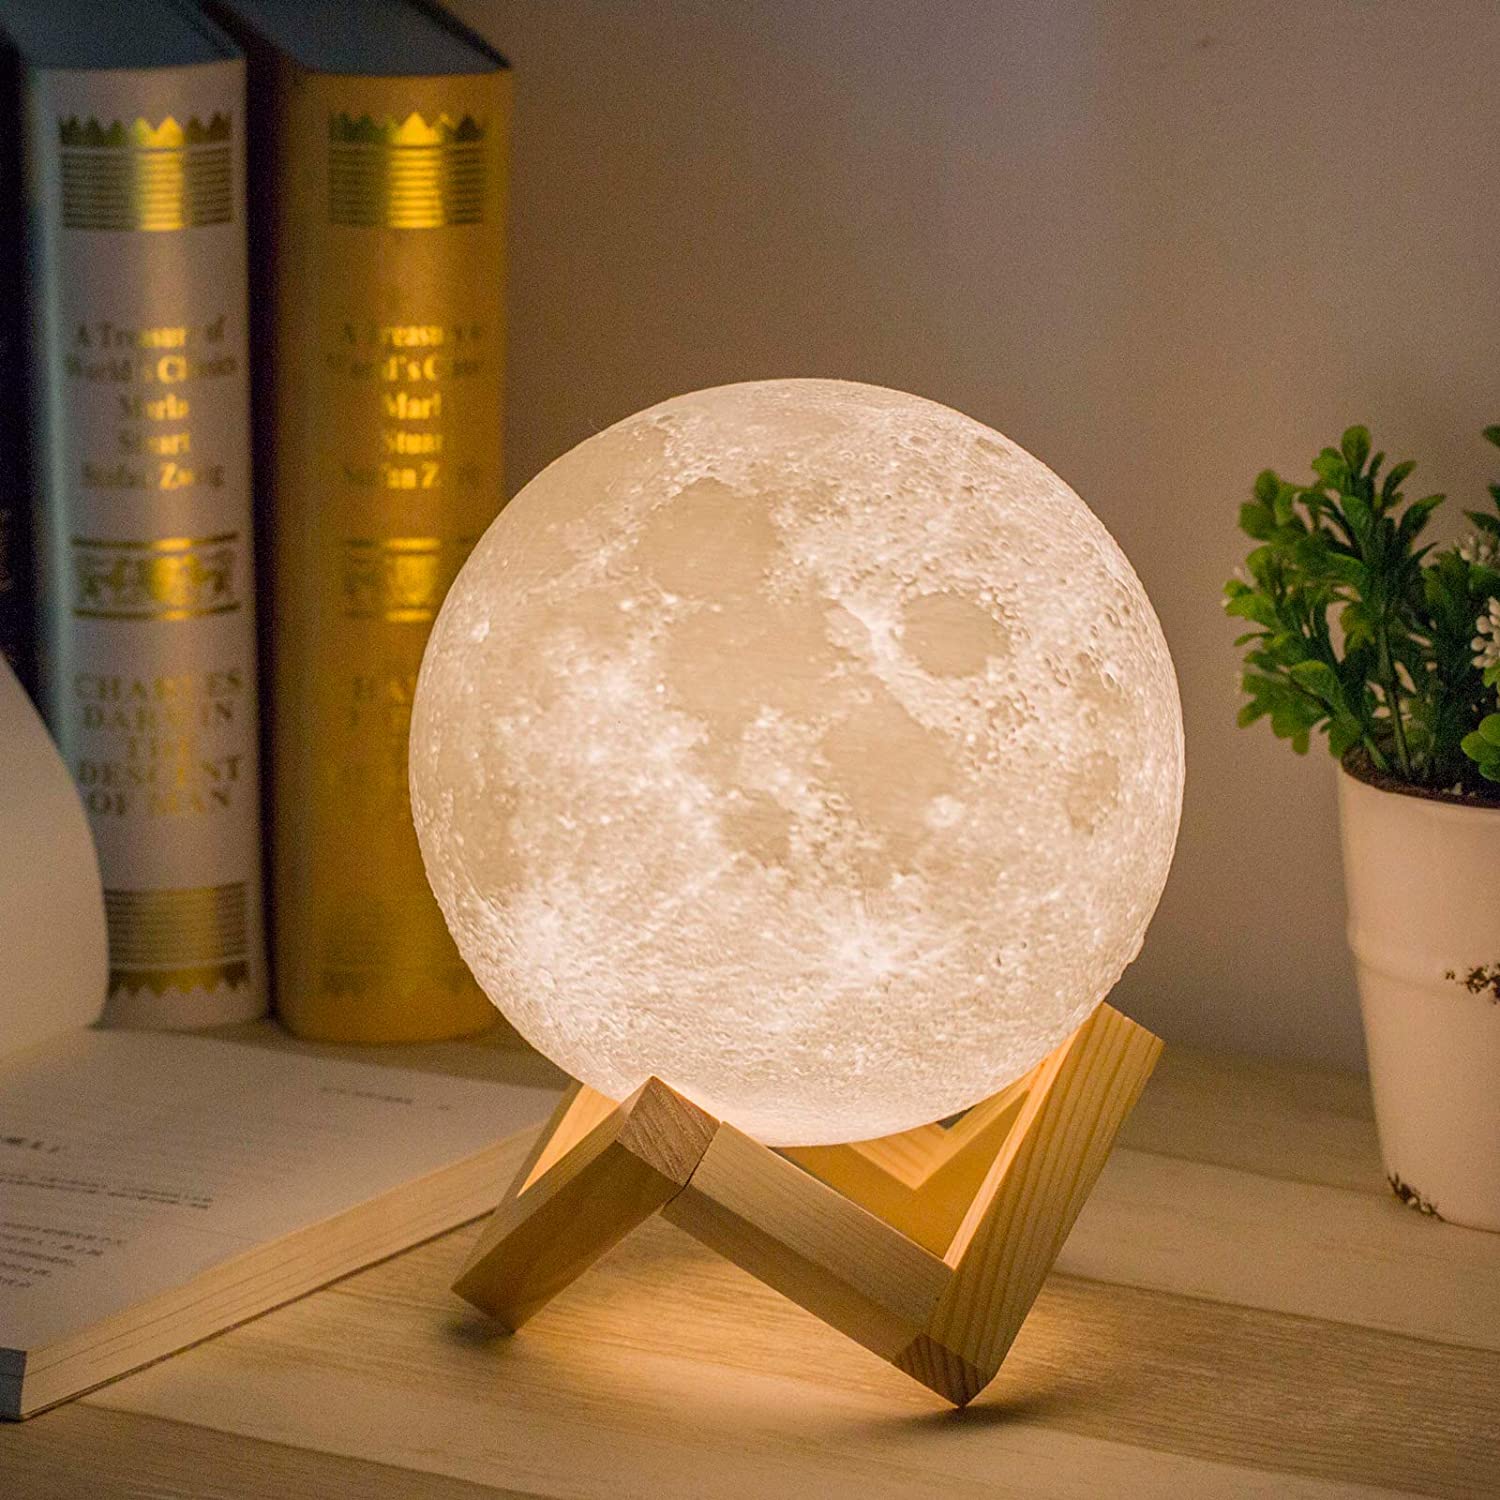 Moon Lamp Moon Light Night Light for Kids Gift for Women USB Charging and Touch Control Brightness 3D Printed Warm and Cool White Lunar Lamp(3.5In moon lamp with stand) - image 1 of 7